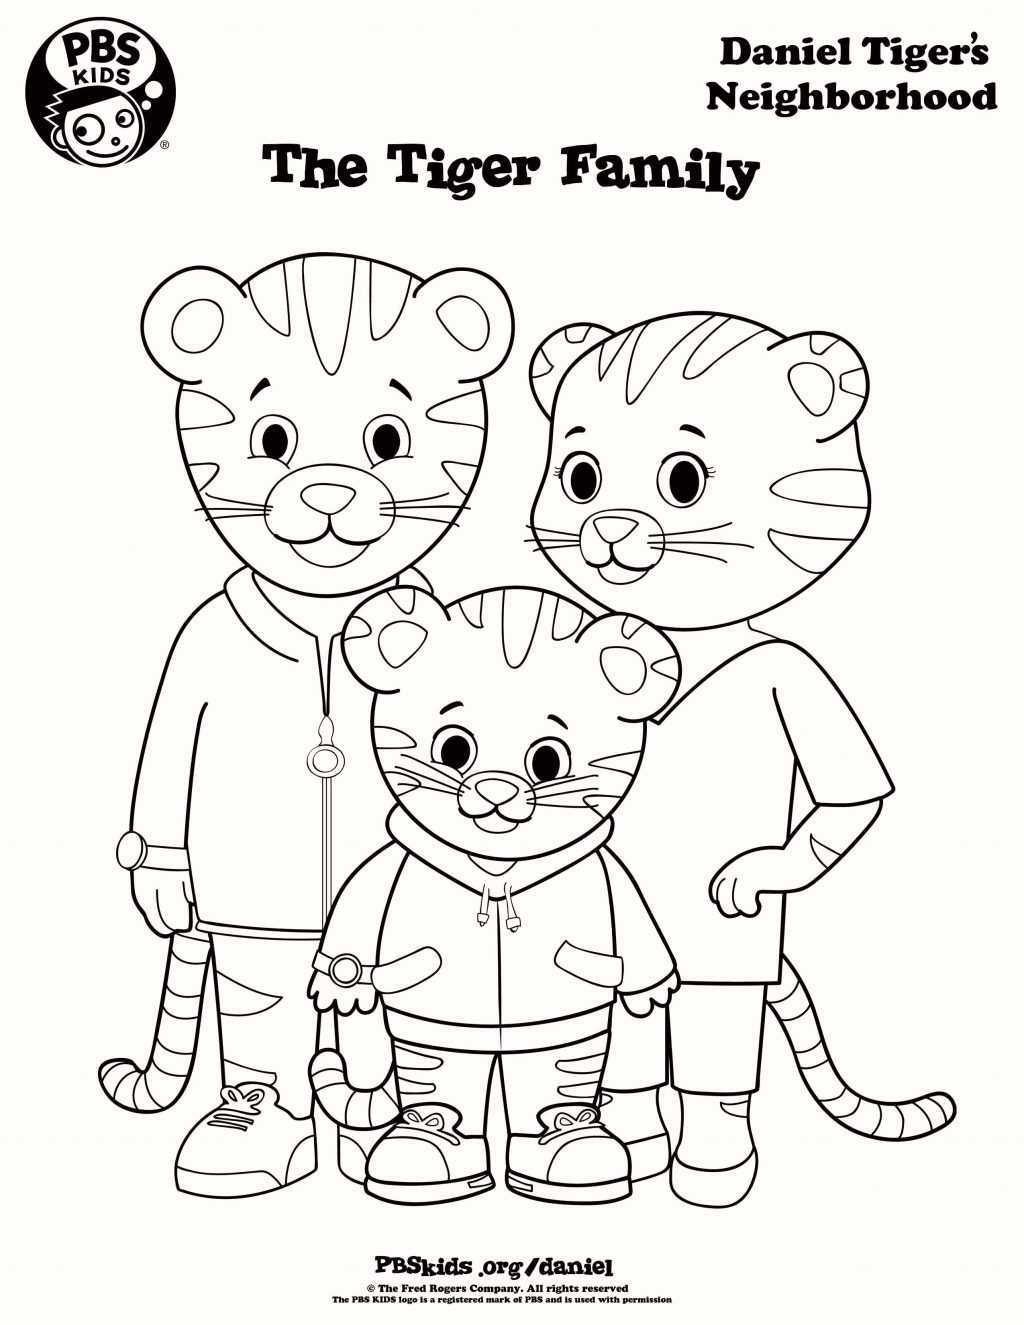 Coloring Pages ~ Daniel Tiger Coloring Pages Printable Elena New - Free Printable Daniel Tiger Coloring Pages